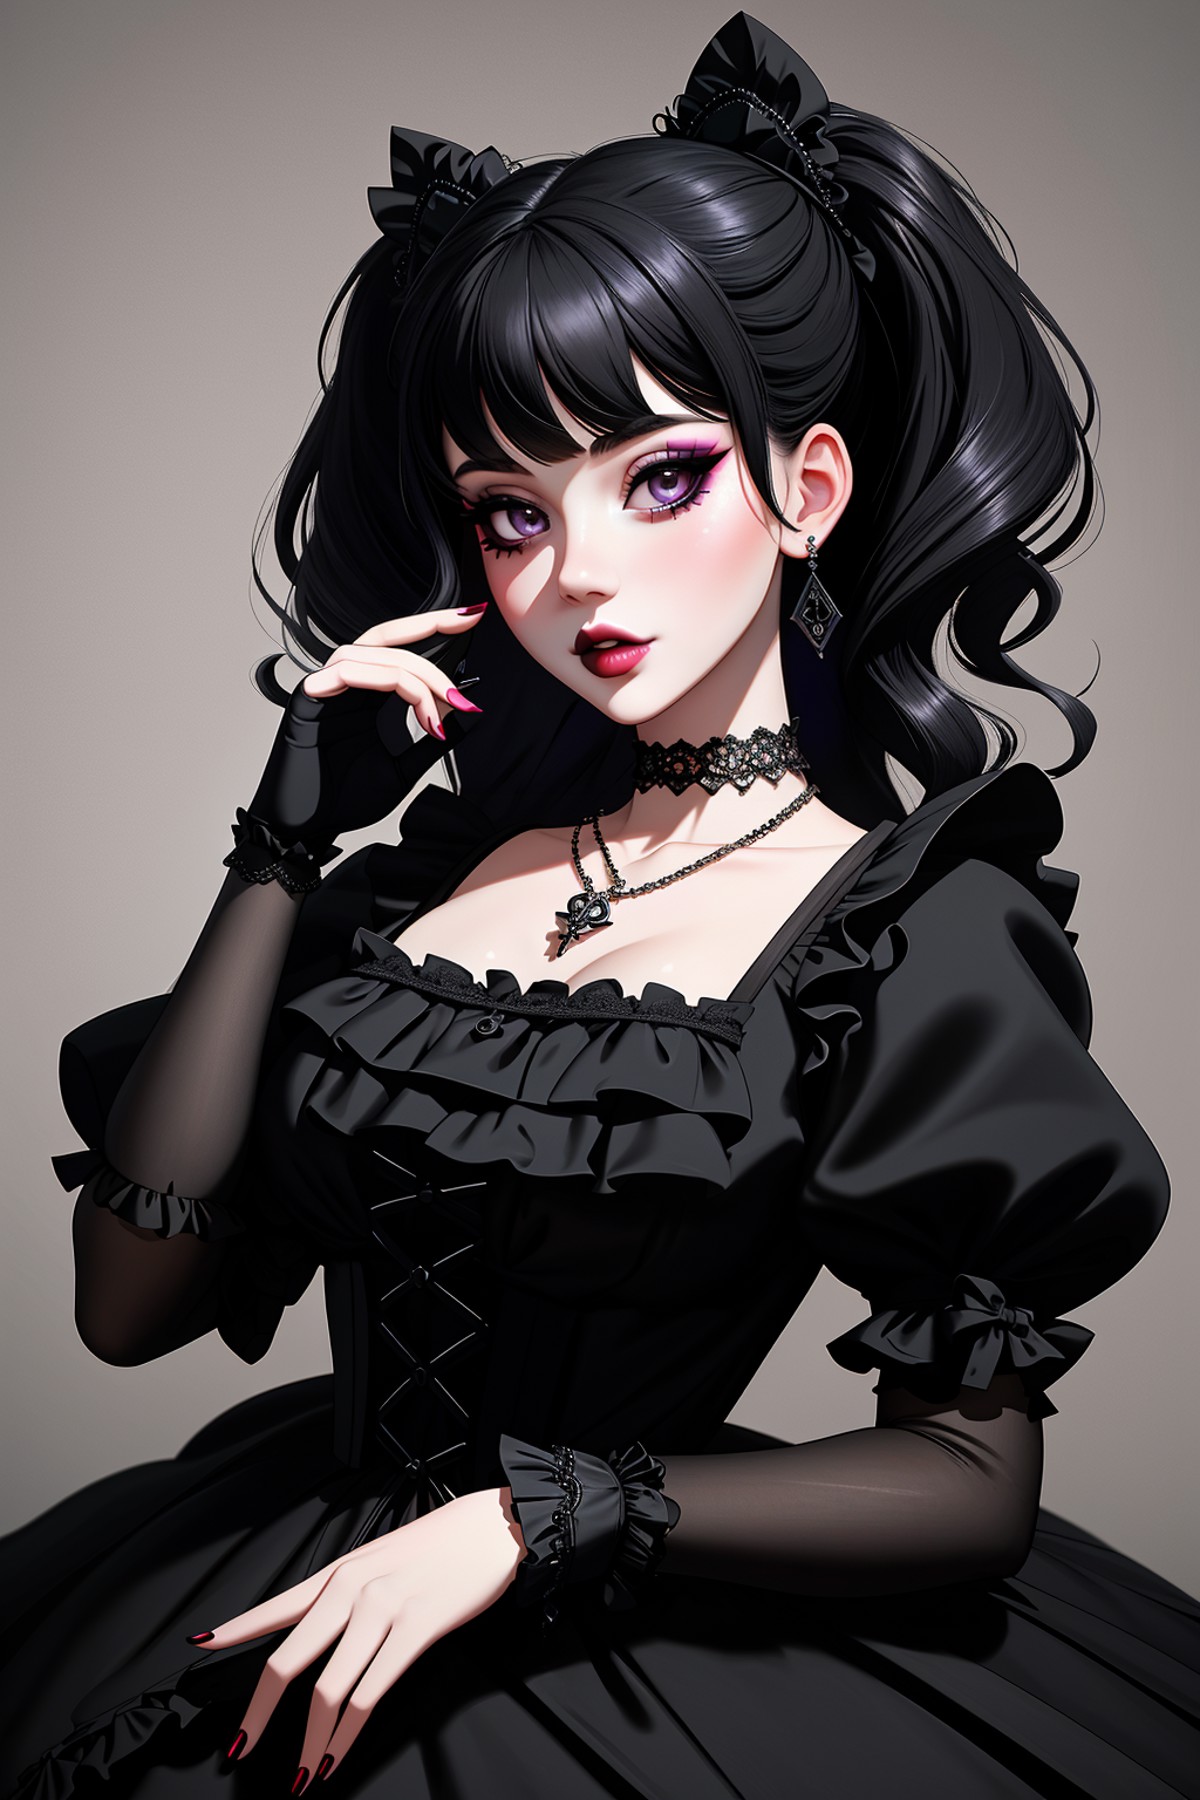 ((Masterpiece, best quality)), edgQuality,bimbo,glossy,
GothGal, a woman in a black dress posing for a picture, frills, la...